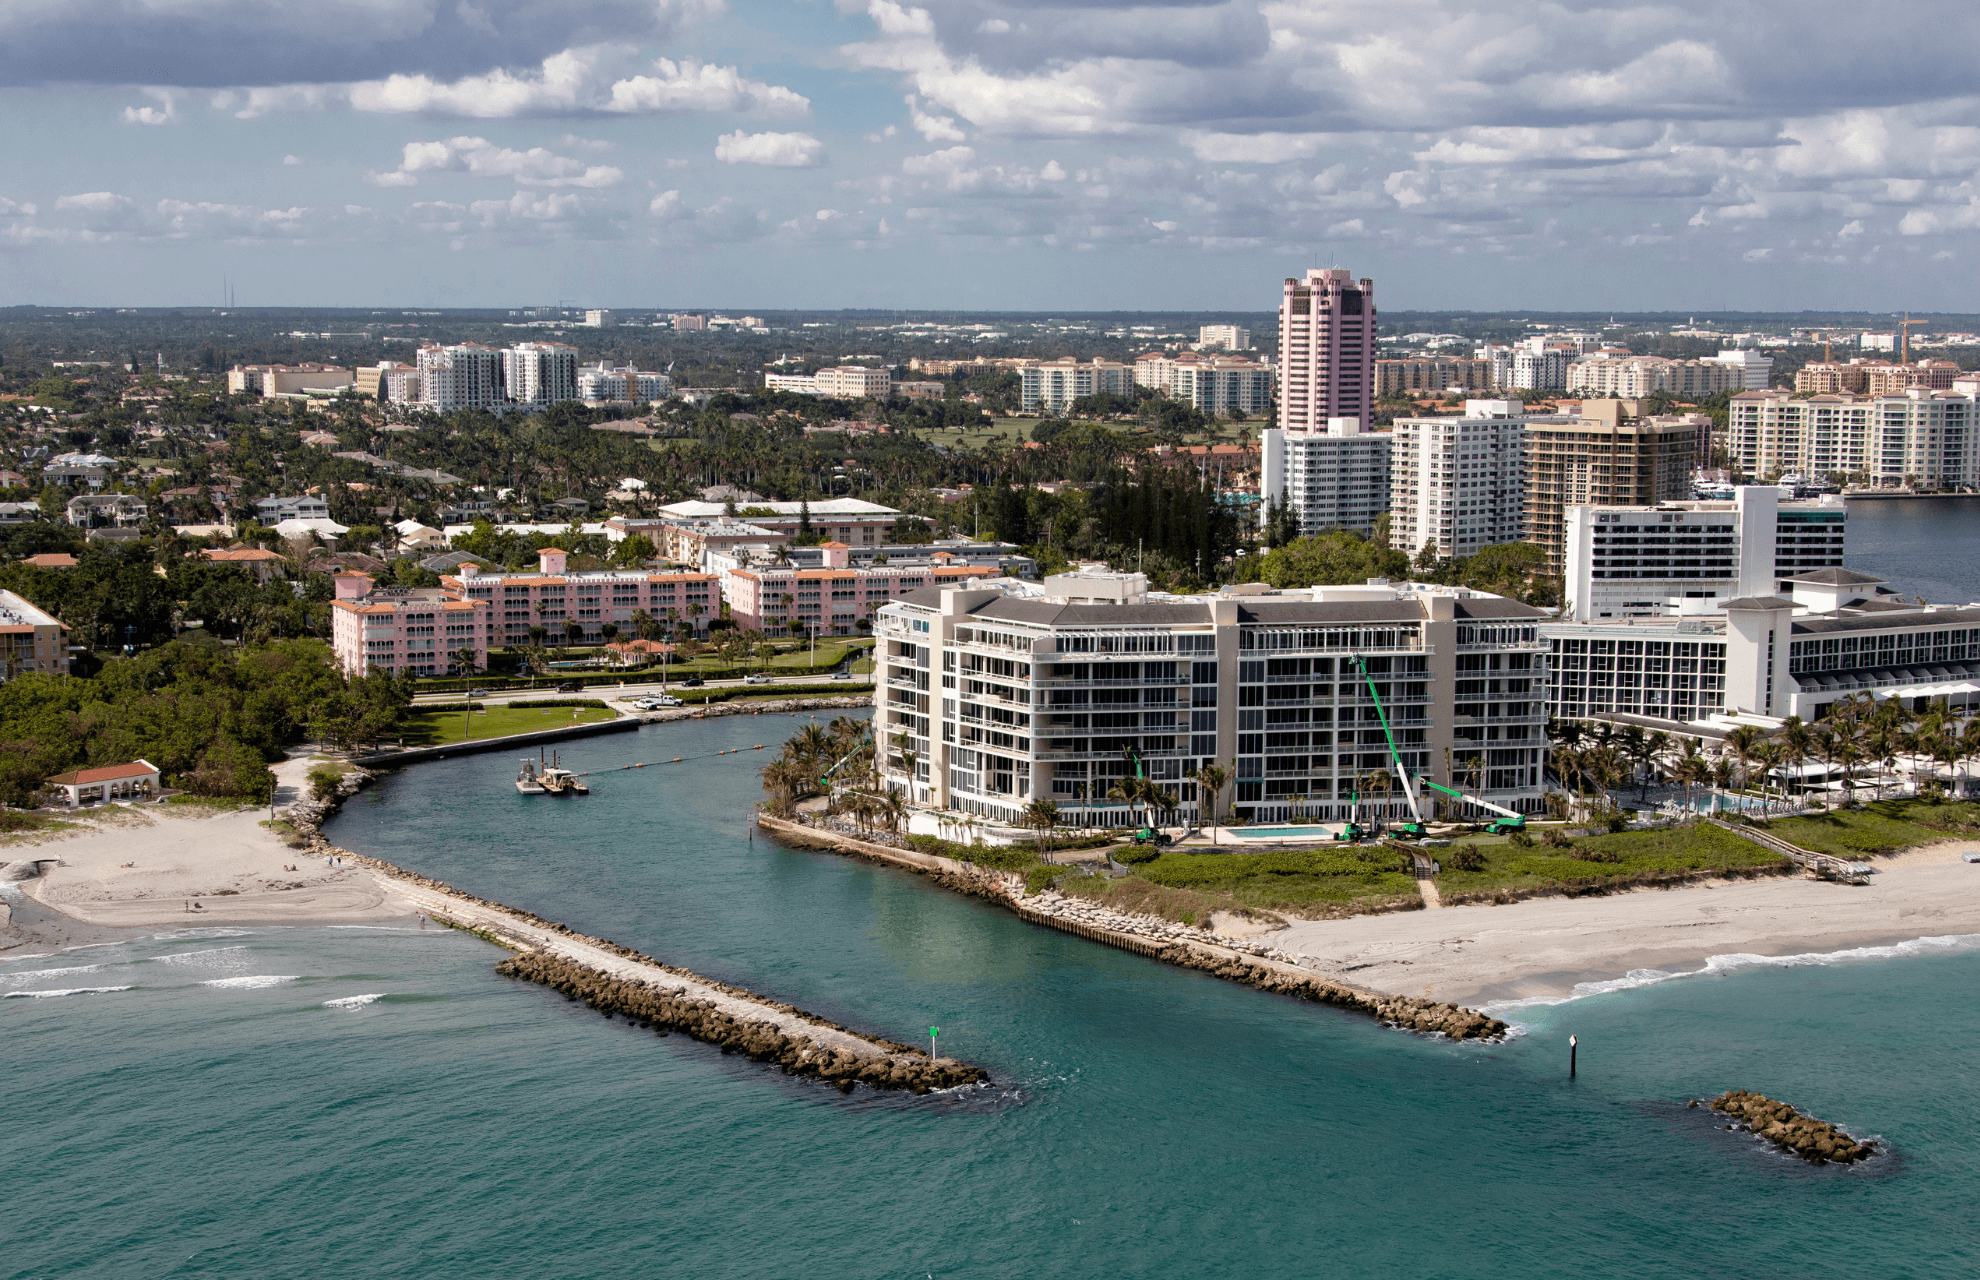 Aerial view of Boca Raton Inlet